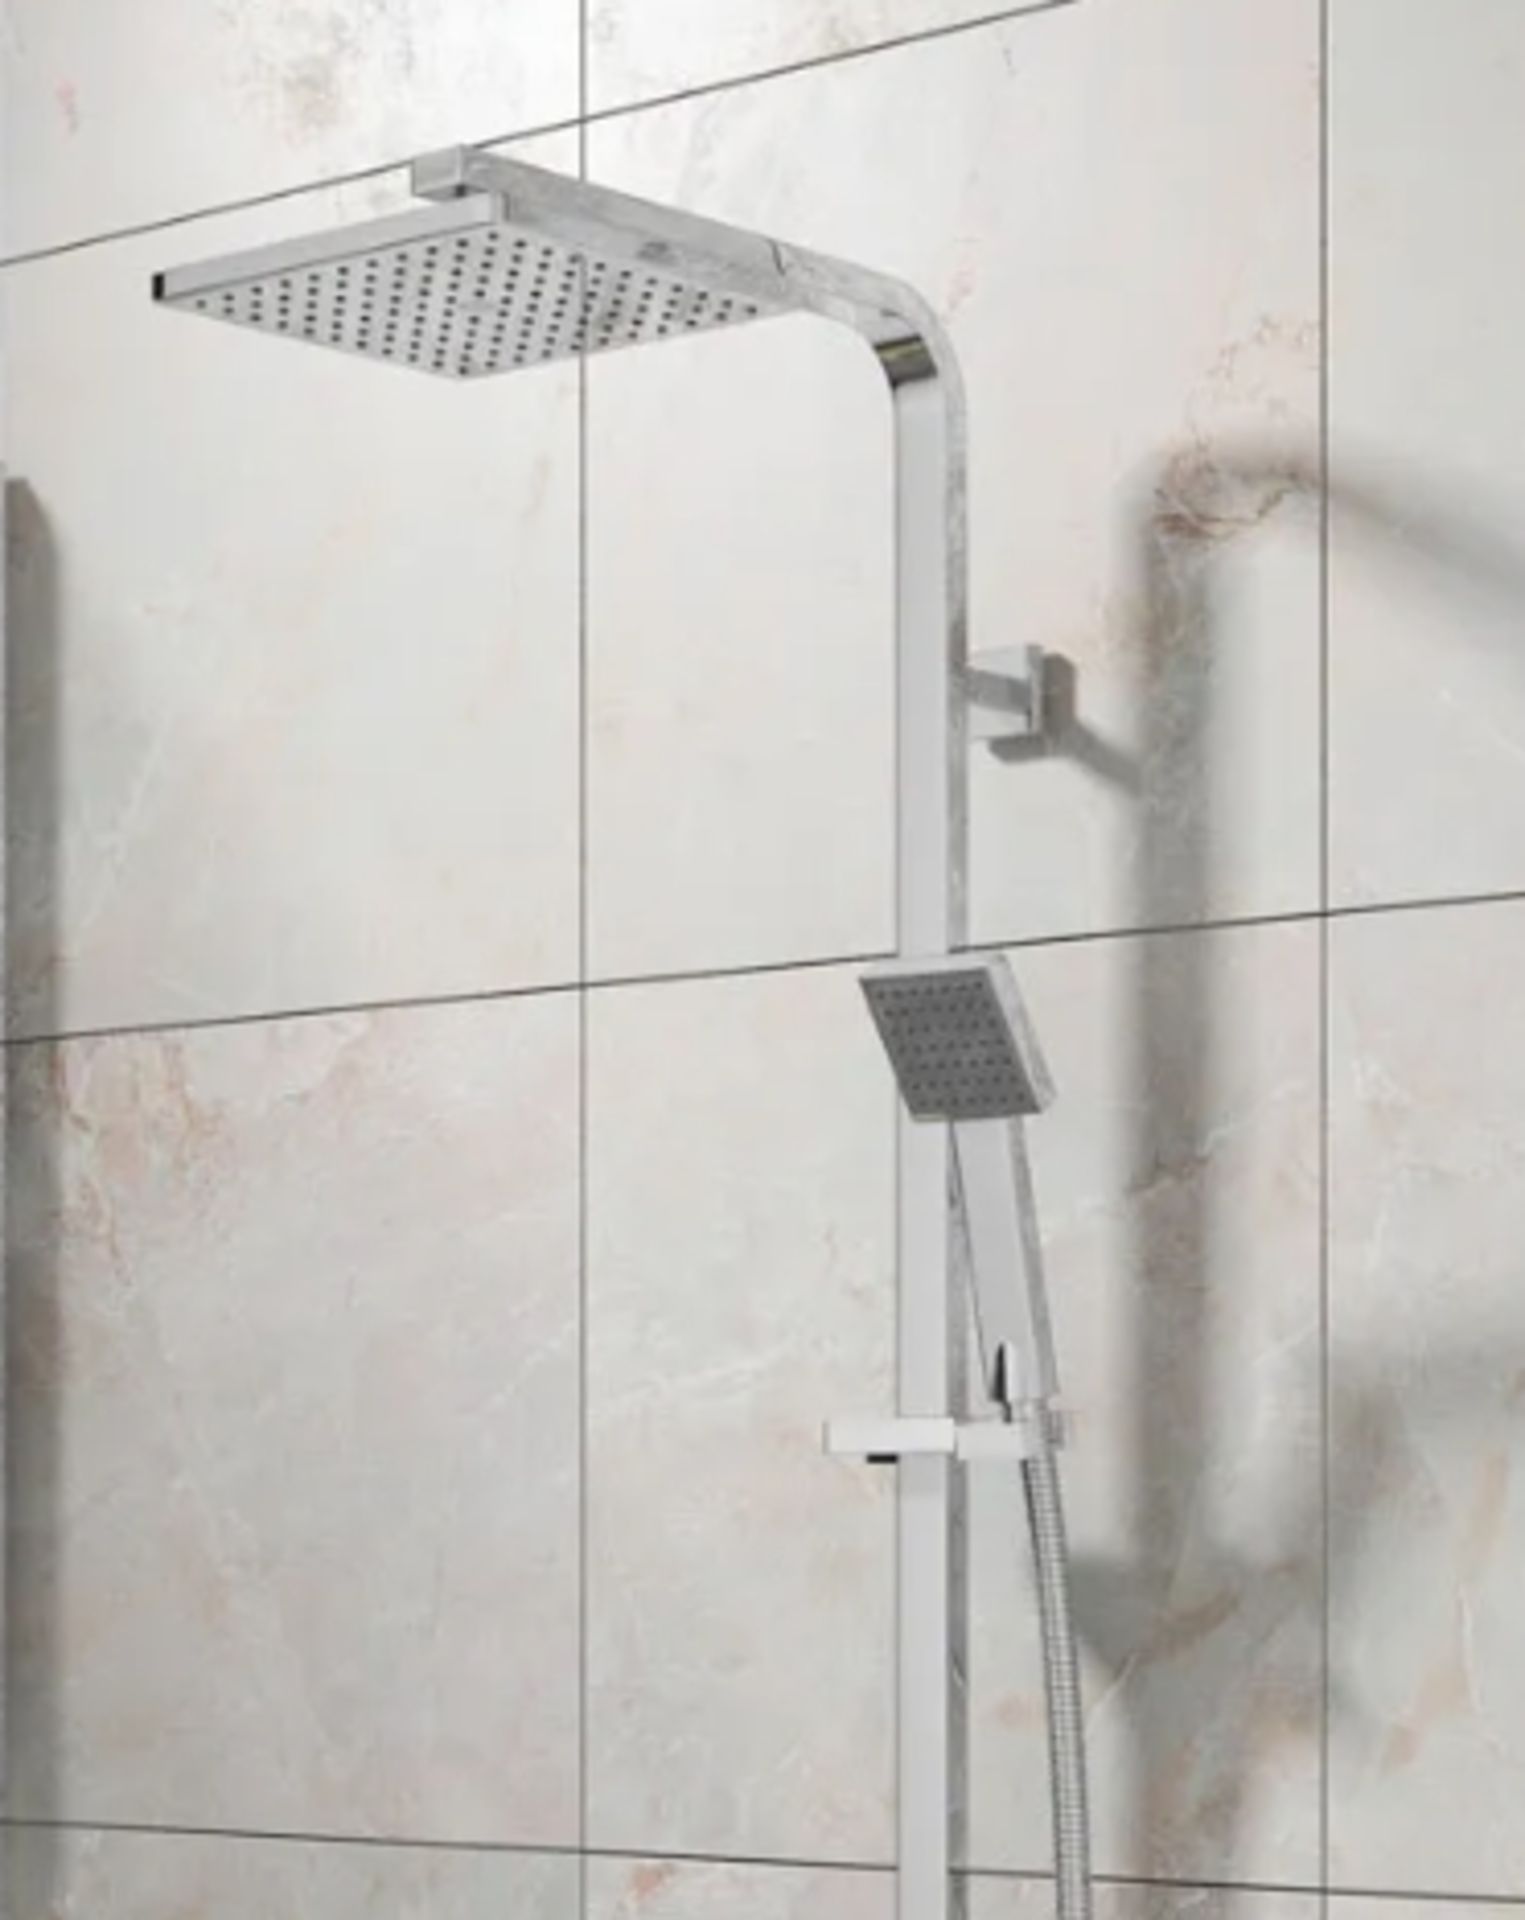 1 x Arley Biscay Chrome Thermostatic Shower Kit With Square Bar Valve - New Boxed Stock - RRP £238 - Image 2 of 3